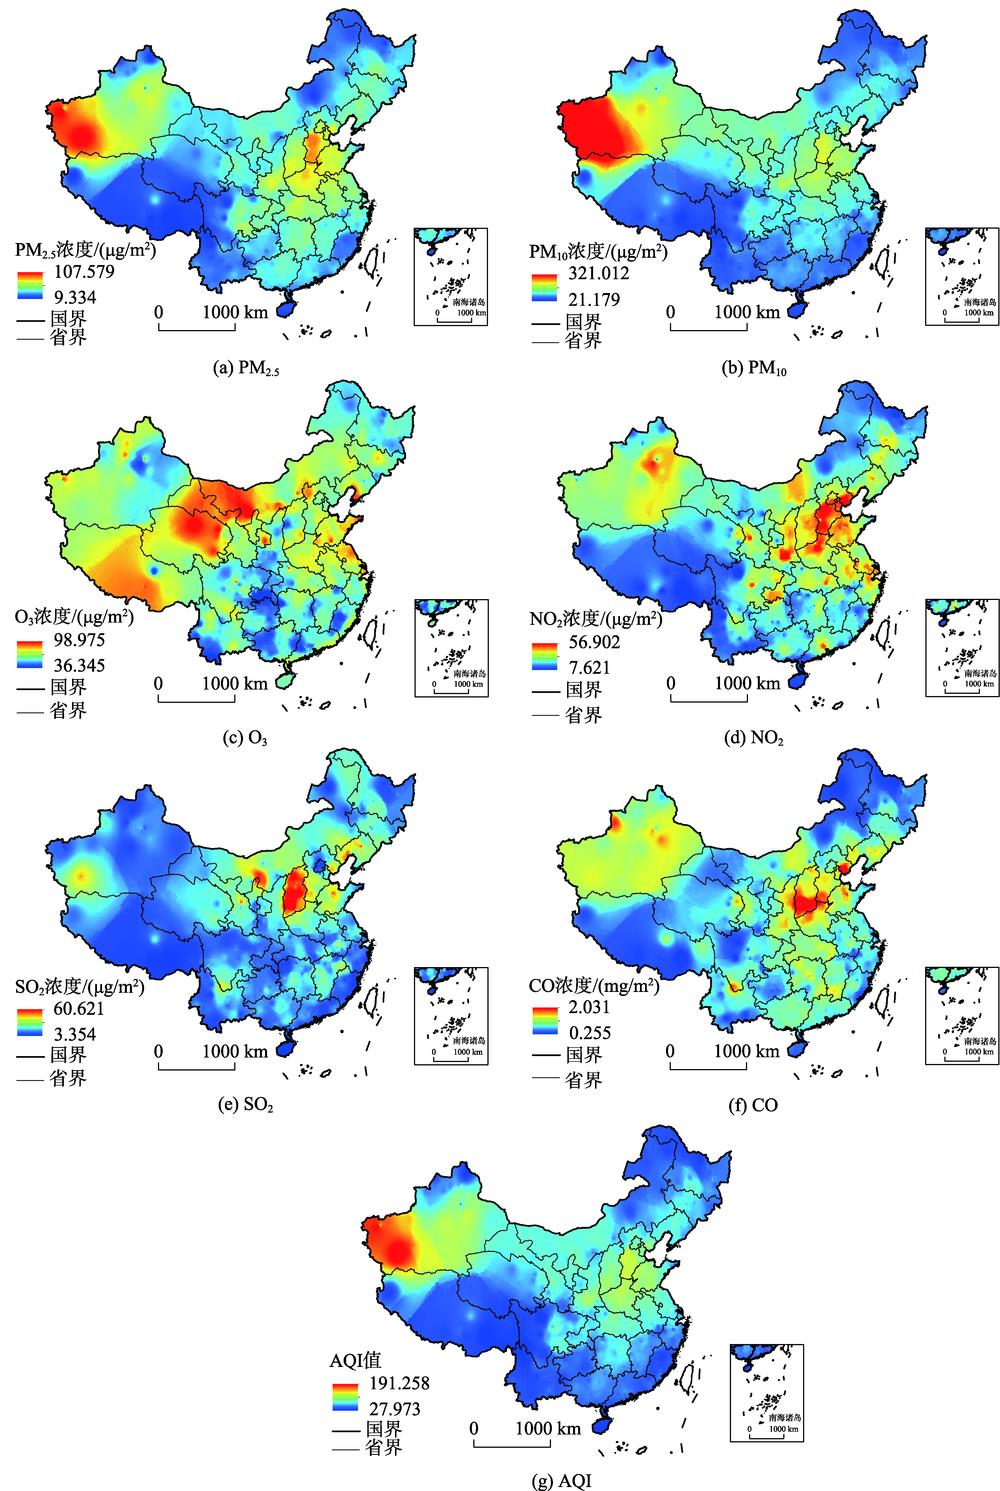 Average mass concentration of six key atmospheric pollutants and AQI in China from 2015 to 2019